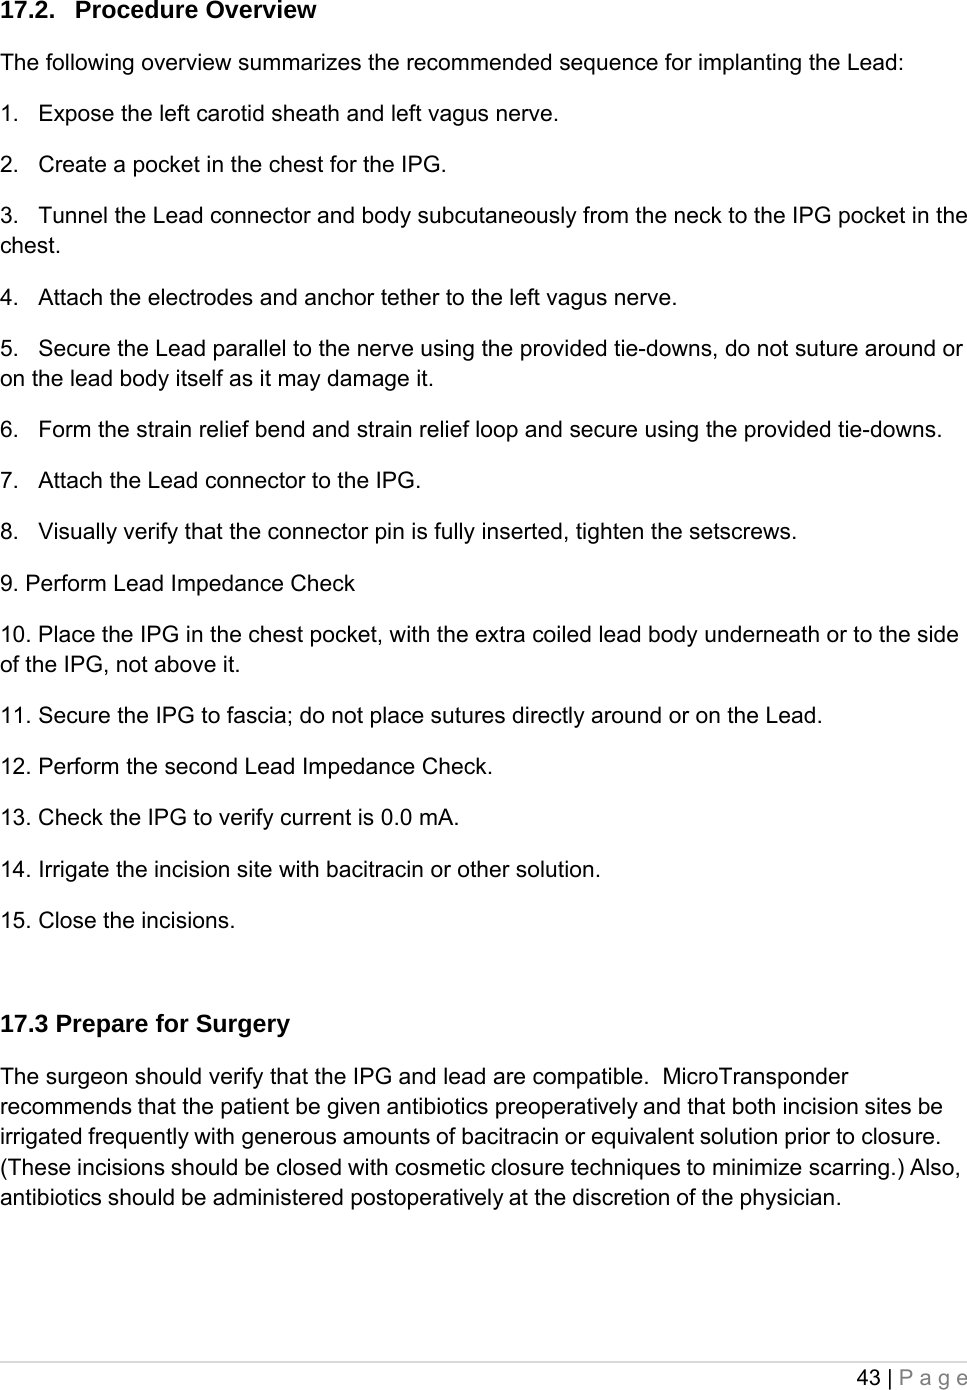 43 | Page  17.2. Procedure Overview The following overview summarizes the recommended sequence for implanting the Lead: 1.   Expose the left carotid sheath and left vagus nerve. 2.   Create a pocket in the chest for the IPG. 3.   Tunnel the Lead connector and body subcutaneously from the neck to the IPG pocket in the chest. 4.   Attach the electrodes and anchor tether to the left vagus nerve. 5.   Secure the Lead parallel to the nerve using the provided tie-downs, do not suture around or on the lead body itself as it may damage it. 6.   Form the strain relief bend and strain relief loop and secure using the provided tie-downs. 7.   Attach the Lead connector to the IPG. 8.   Visually verify that the connector pin is fully inserted, tighten the setscrews. 9. Perform Lead Impedance Check 10. Place the IPG in the chest pocket, with the extra coiled lead body underneath or to the side of the IPG, not above it. 11. Secure the IPG to fascia; do not place sutures directly around or on the Lead. 12. Perform the second Lead Impedance Check. 13. Check the IPG to verify current is 0.0 mA. 14. Irrigate the incision site with bacitracin or other solution. 15. Close the incisions.  17.3 Prepare for Surgery The surgeon should verify that the IPG and lead are compatible.  MicroTransponder recommends that the patient be given antibiotics preoperatively and that both incision sites be irrigated frequently with generous amounts of bacitracin or equivalent solution prior to closure. (These incisions should be closed with cosmetic closure techniques to minimize scarring.) Also, antibiotics should be administered postoperatively at the discretion of the physician.   